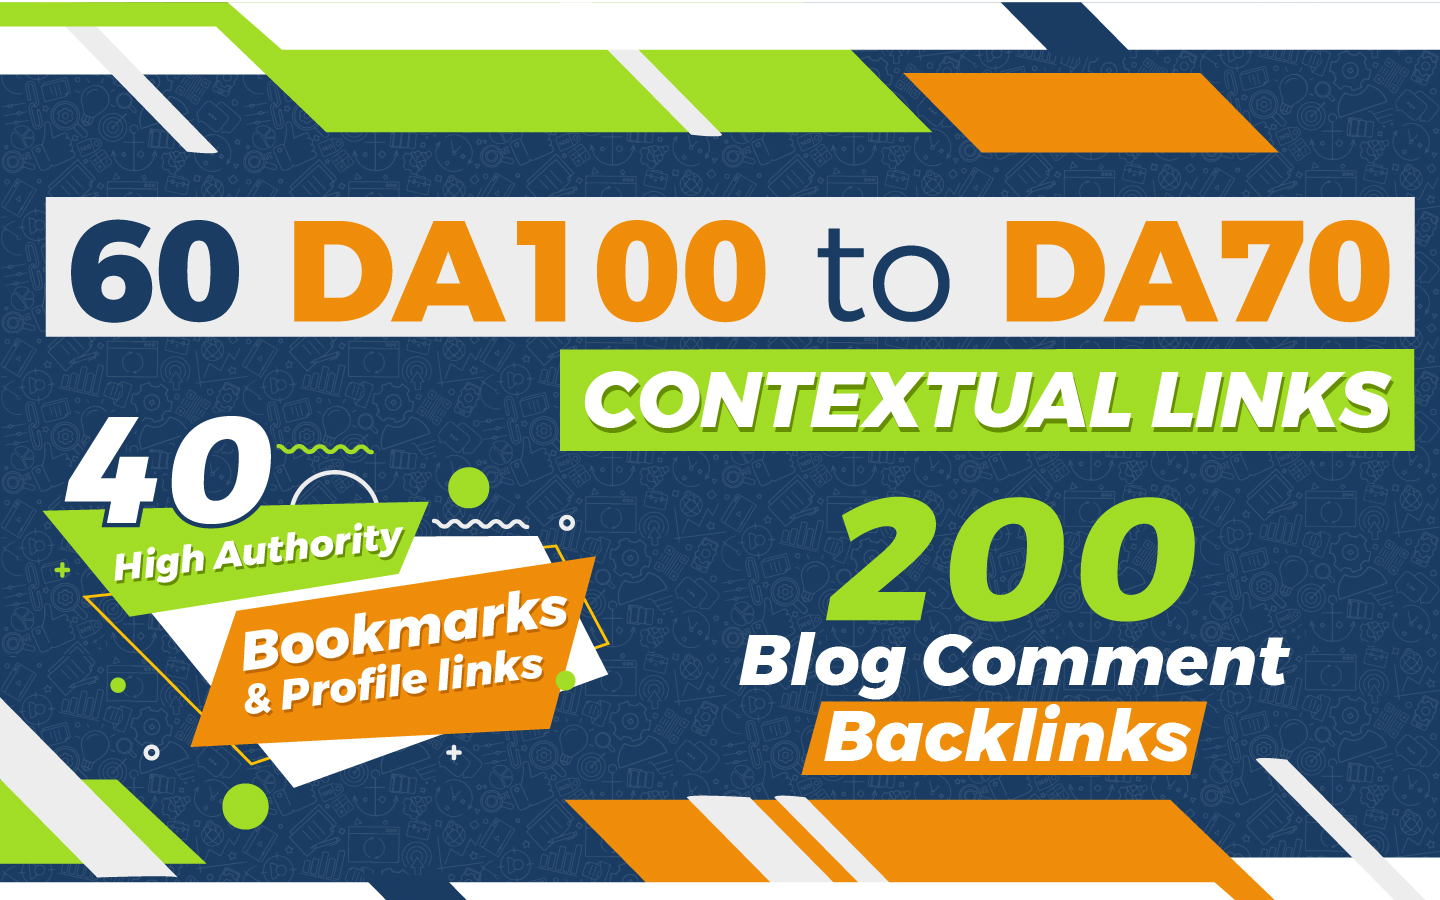 2022 BEST No.1 GUARANTEED SEO RANKING with 100 Contextual Links on DA70 - DA100 Unique Sites From RA